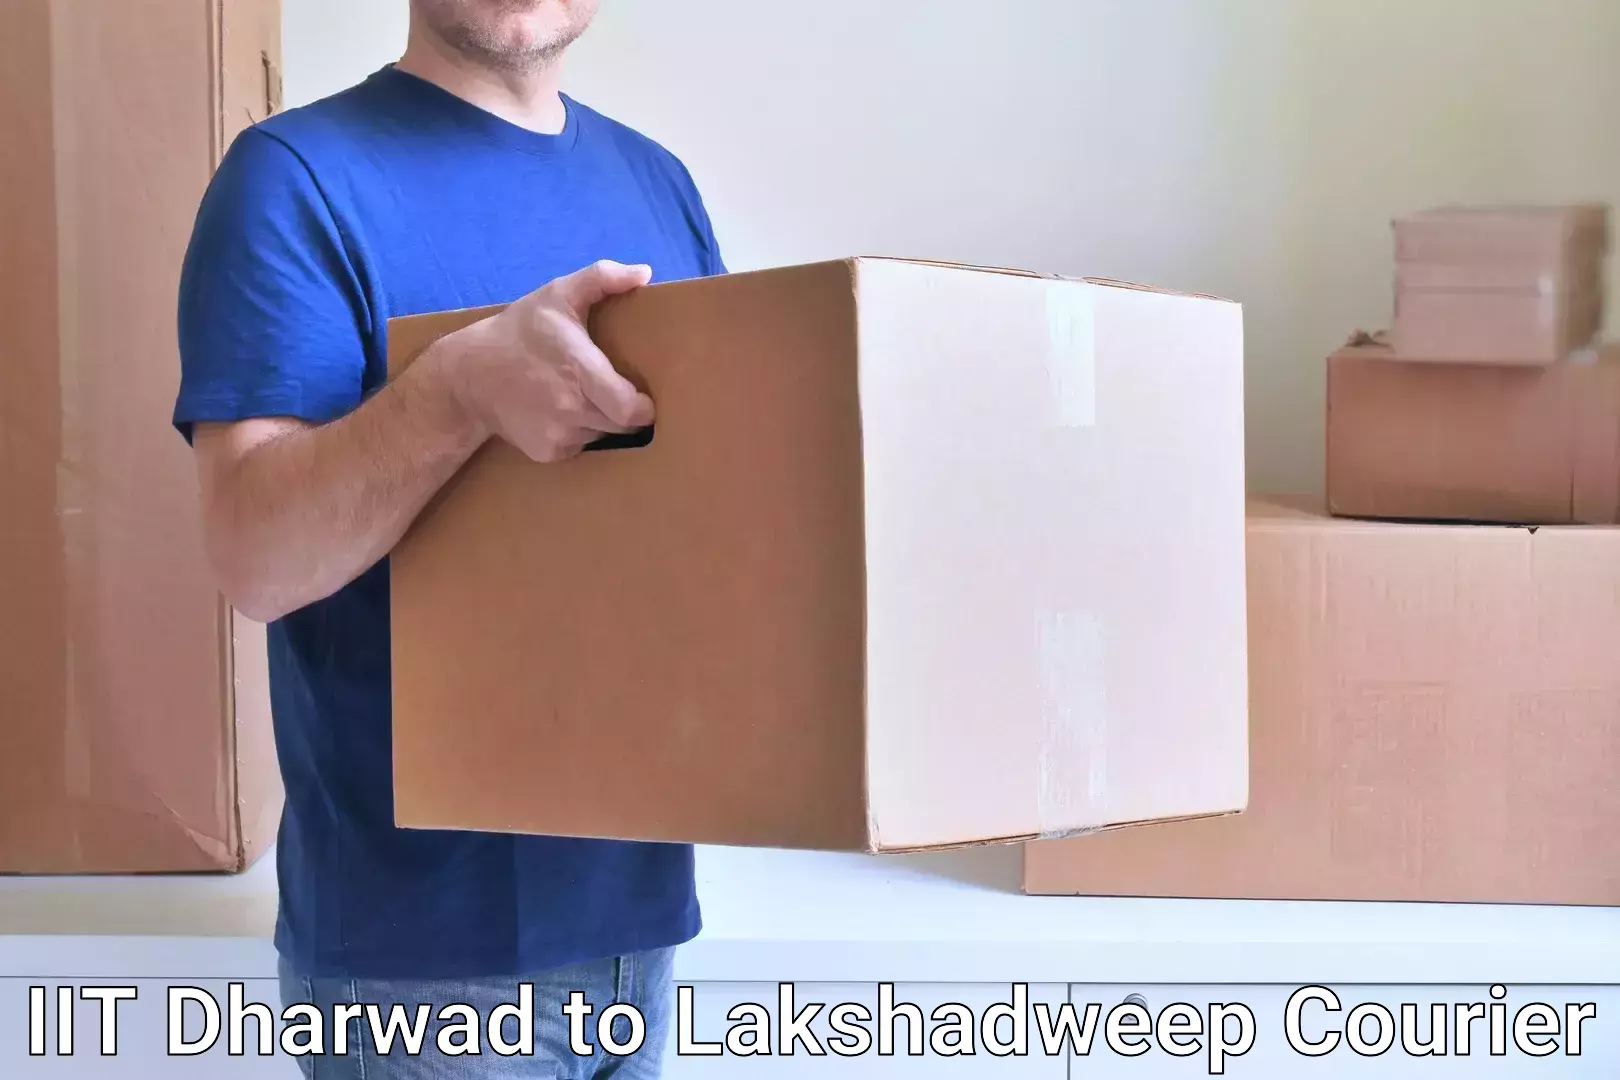 Reliable parcel services IIT Dharwad to Lakshadweep